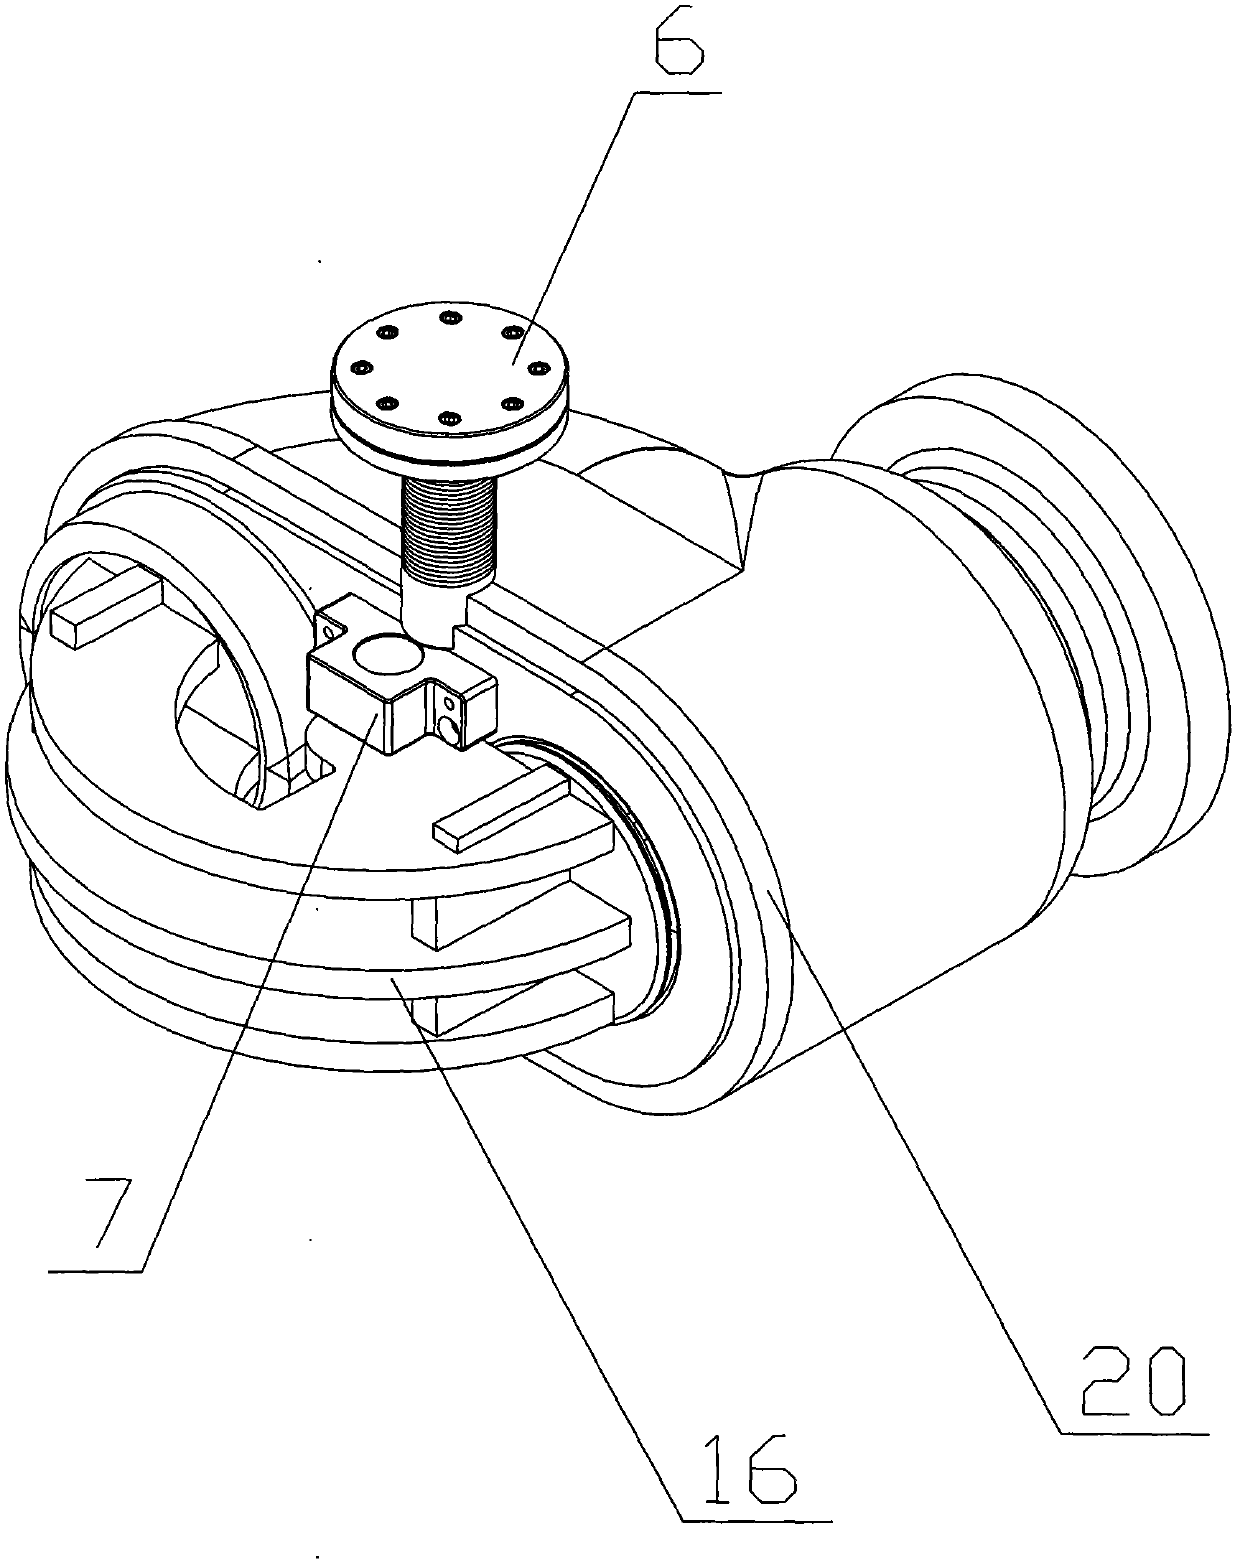 Fully-sealed welded nuclear grade valve